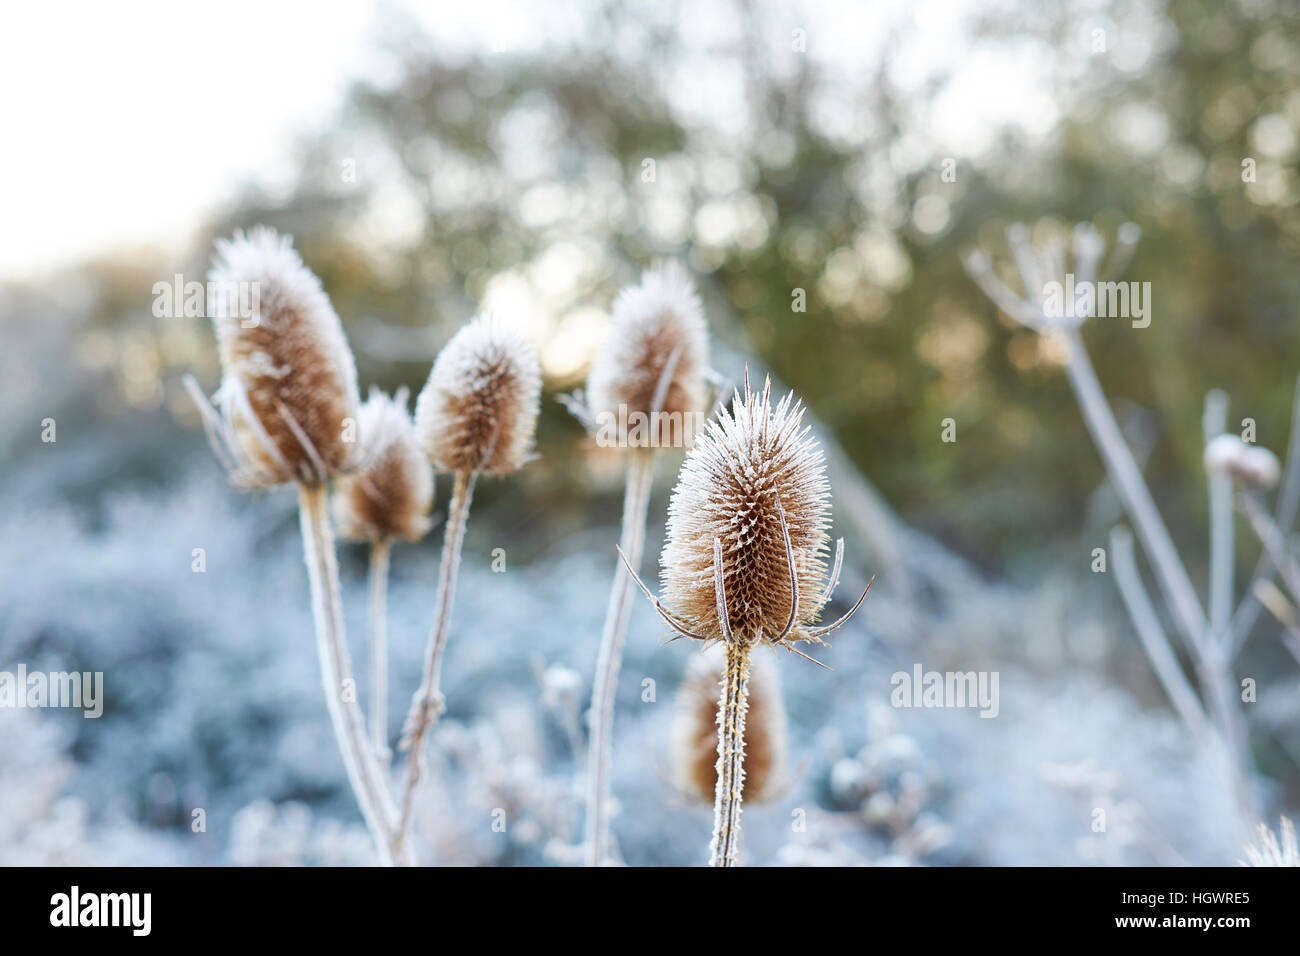 Frosted Teasel (Dipsacus fullonum) dead conical flower heads. Stock Photo